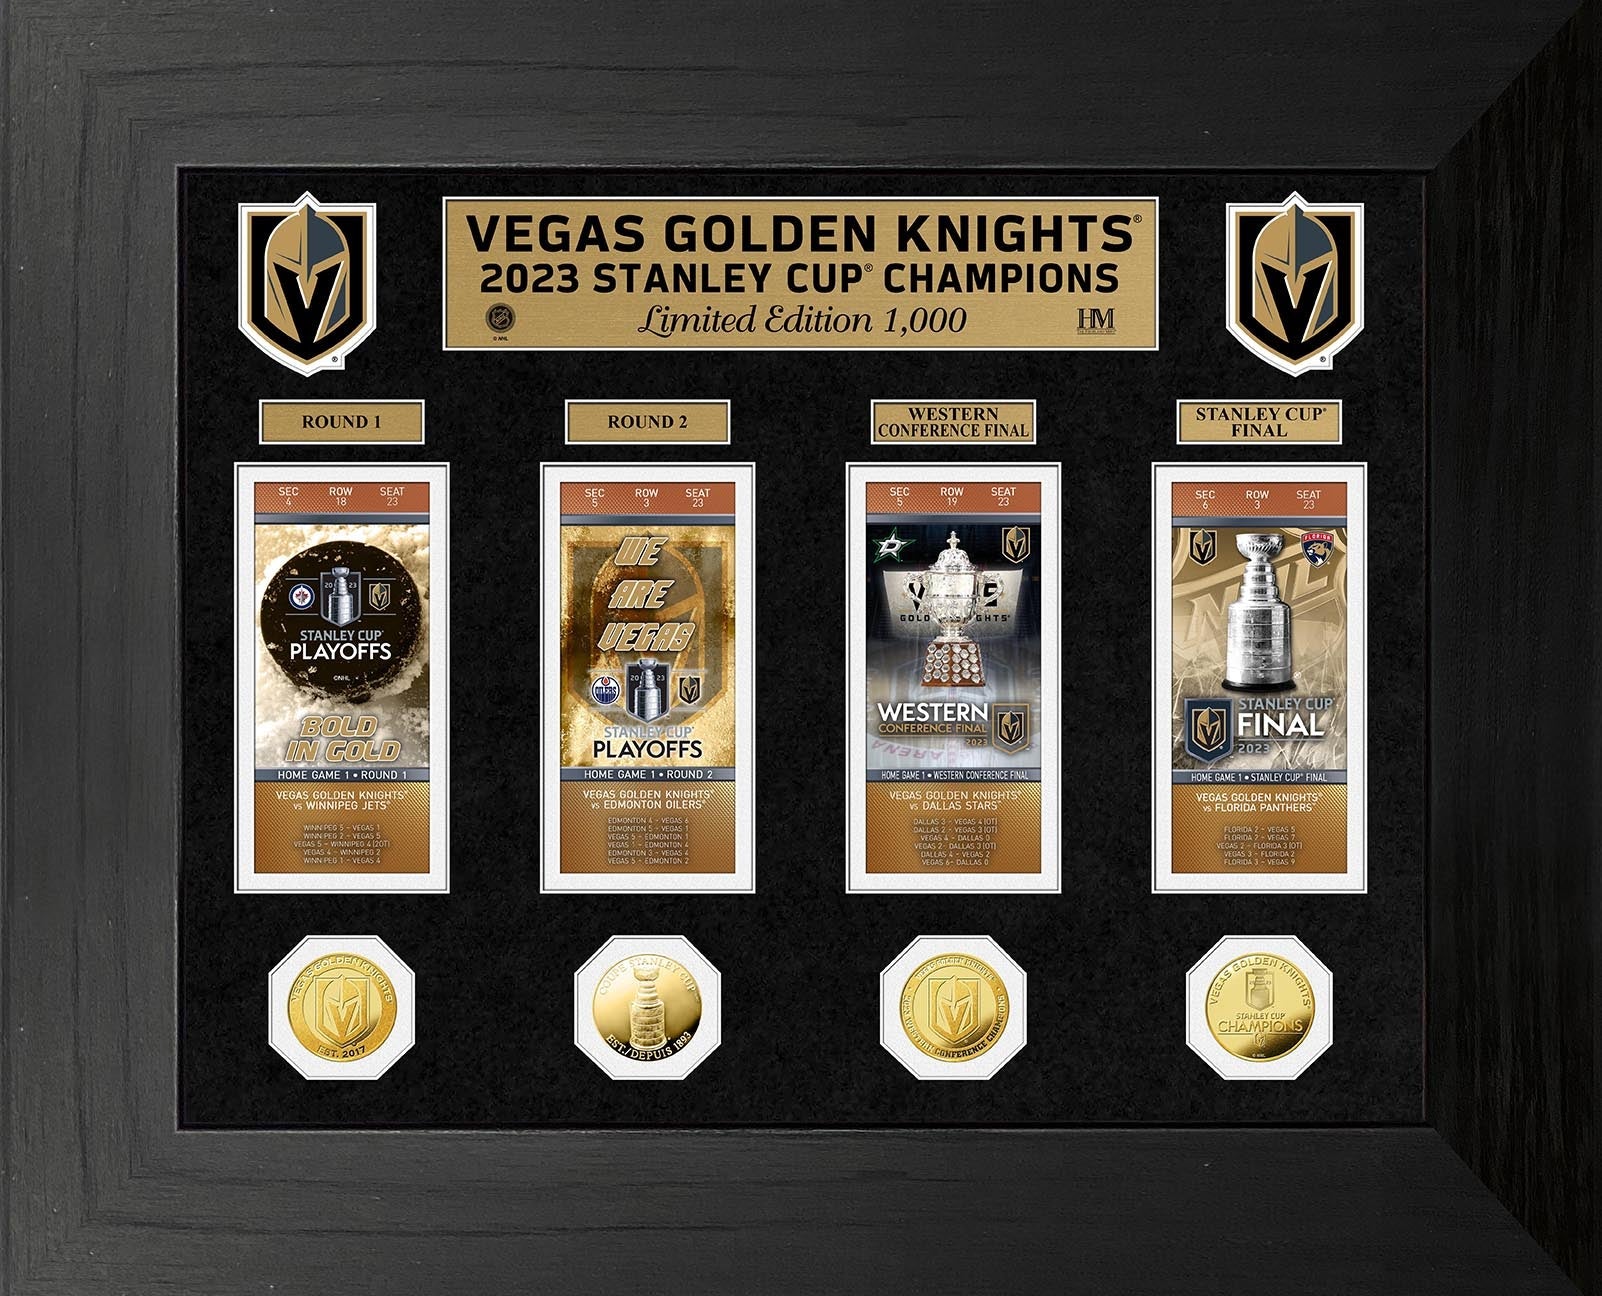 Vegas Golden Knights 2023 NHL Stanley Cup Champions Deluxe Ticket Photo Mint